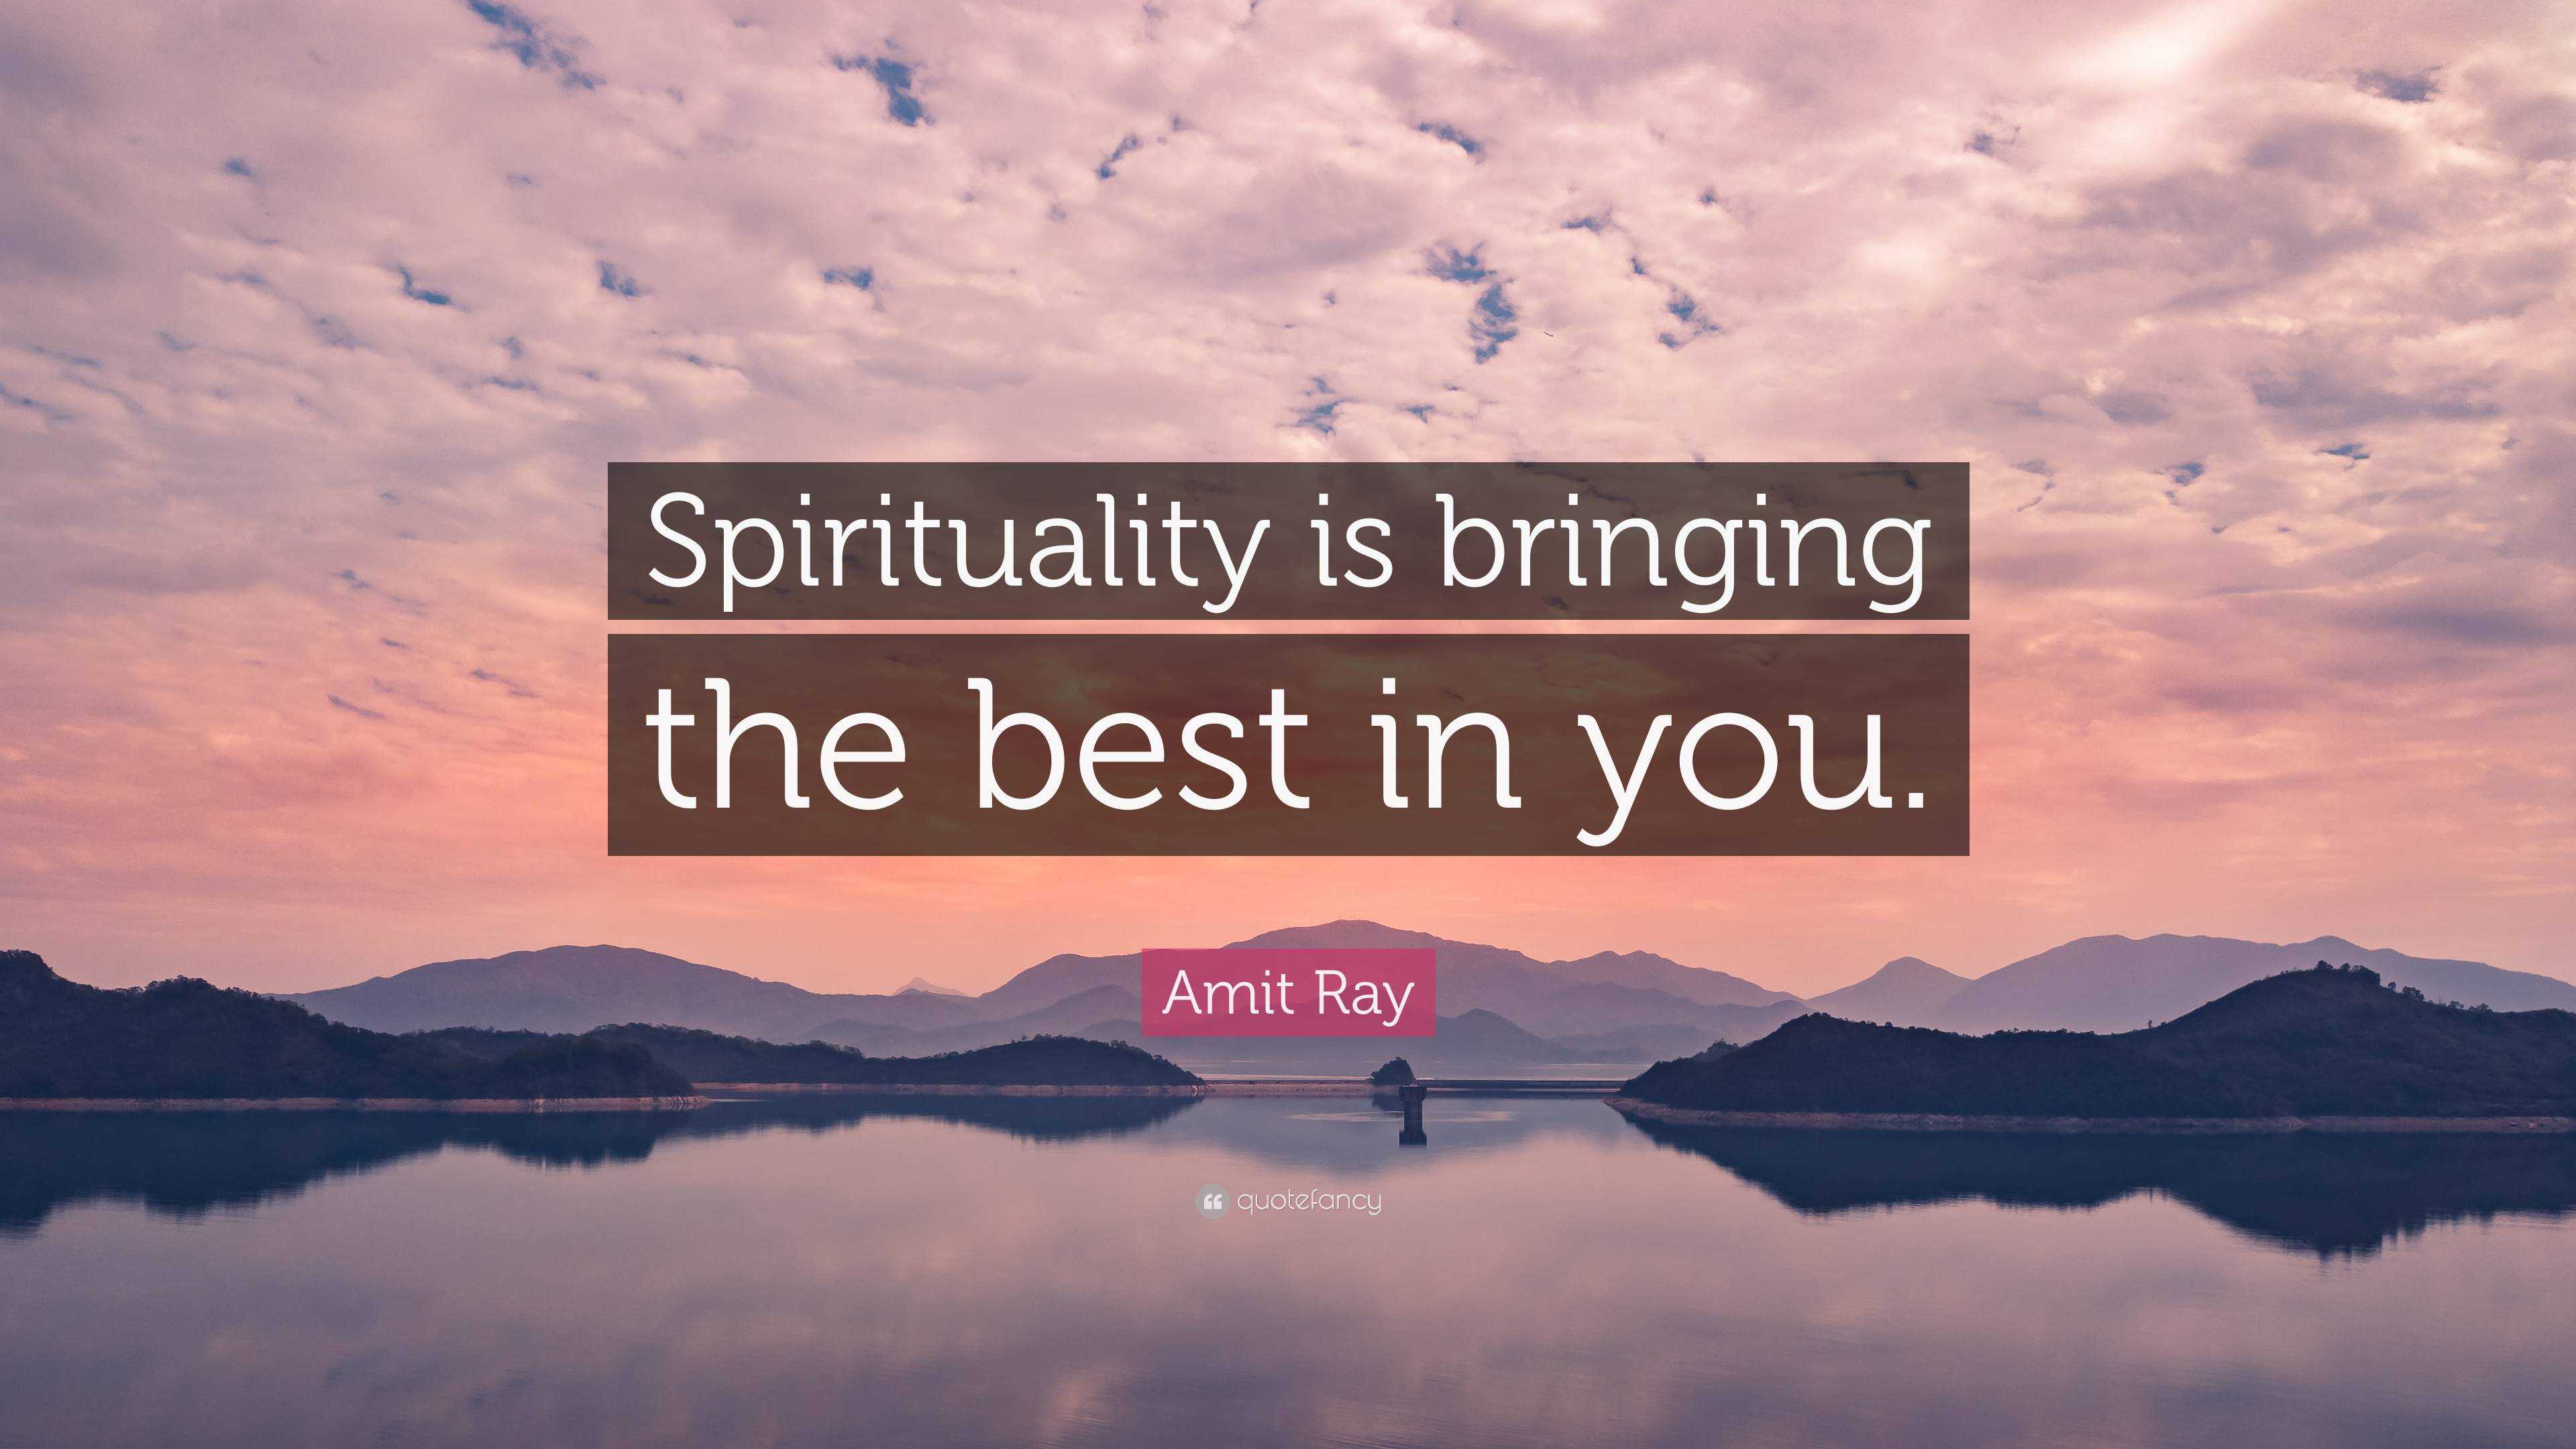 Amit Ray Quote: “Spirituality is bringing the best in you.”